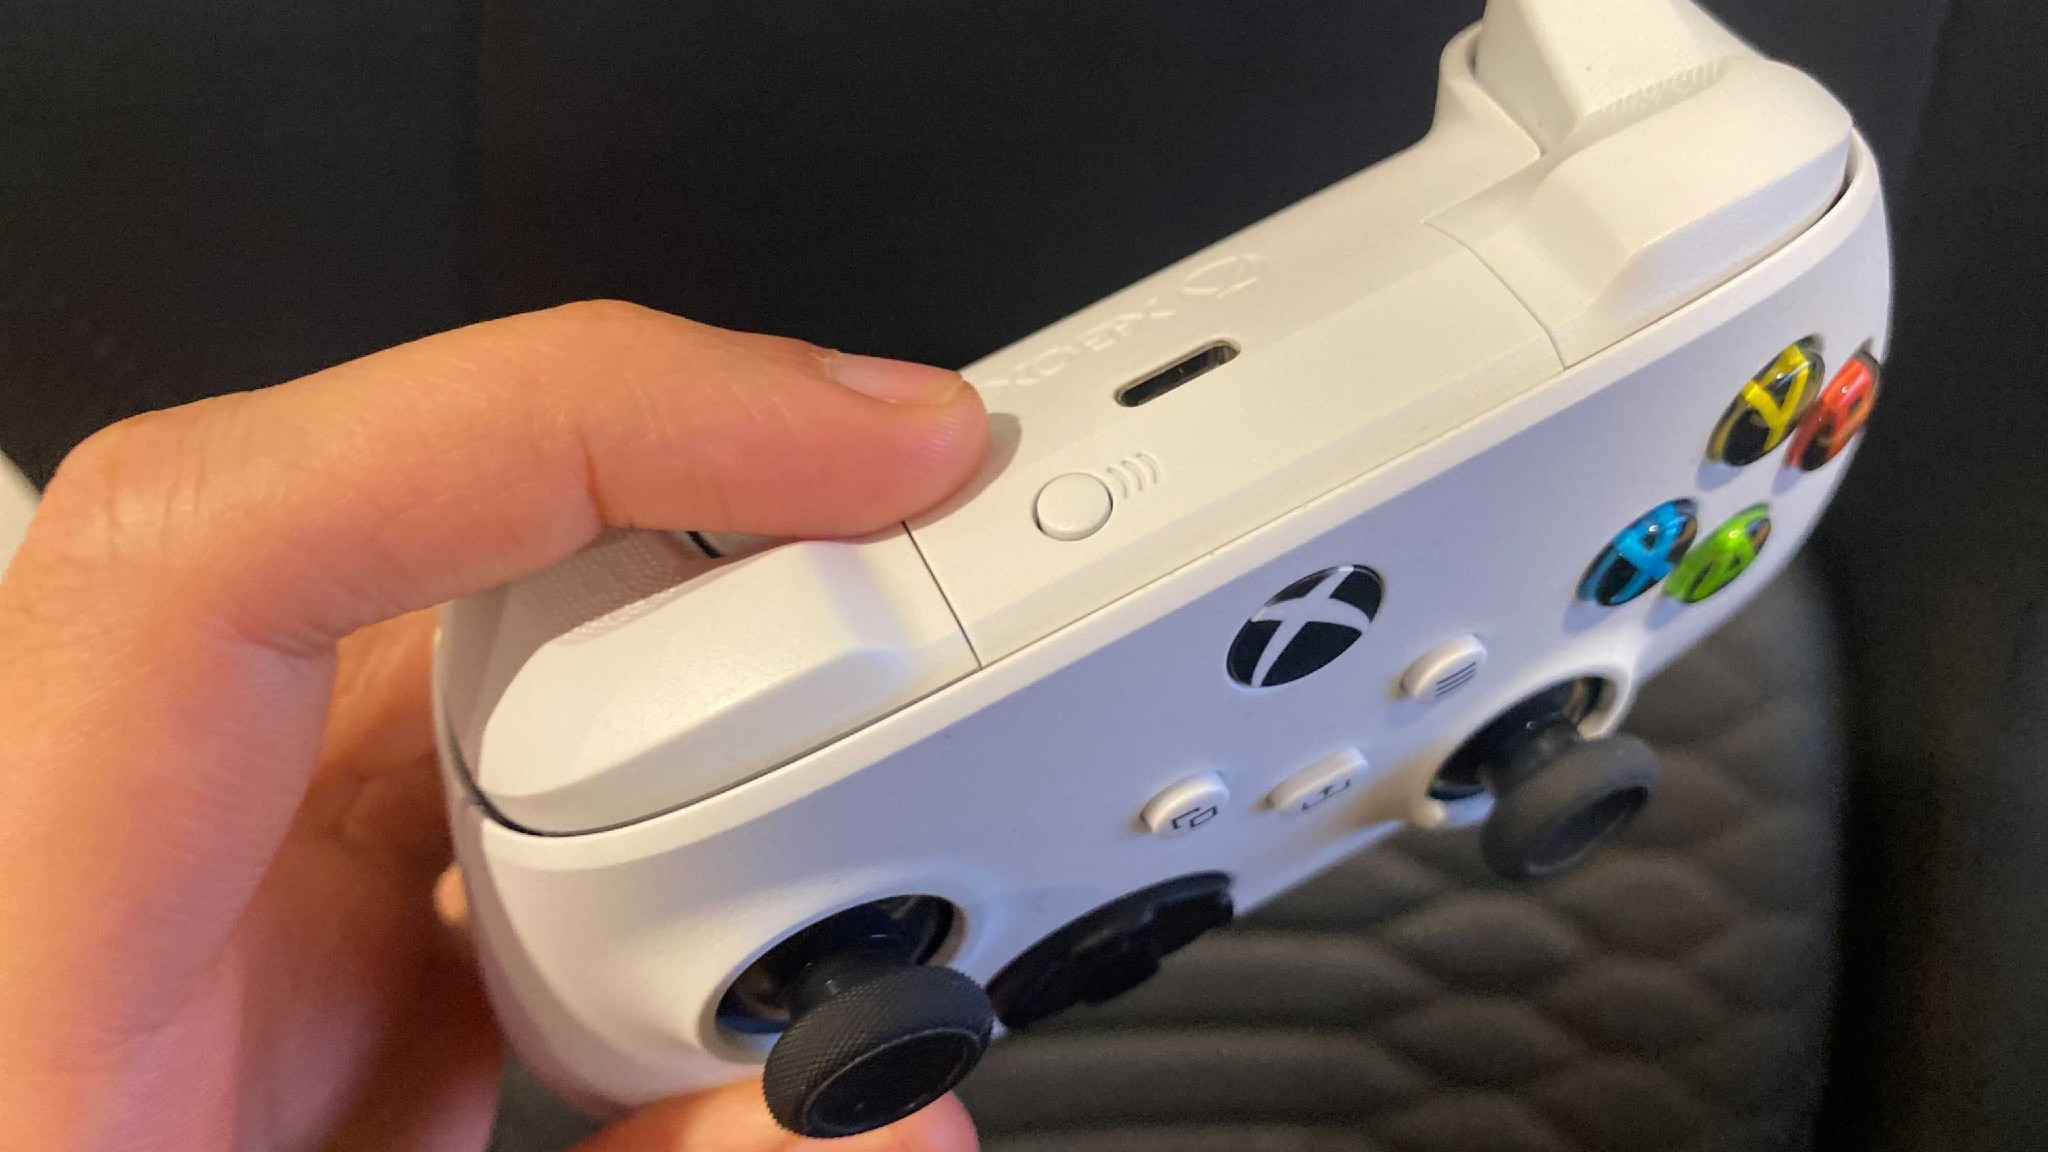 How to use an Xbox One or Series X|S controller with iPhone or iPad: Hold down the pairing button found at the top of the Xbox Controller. 